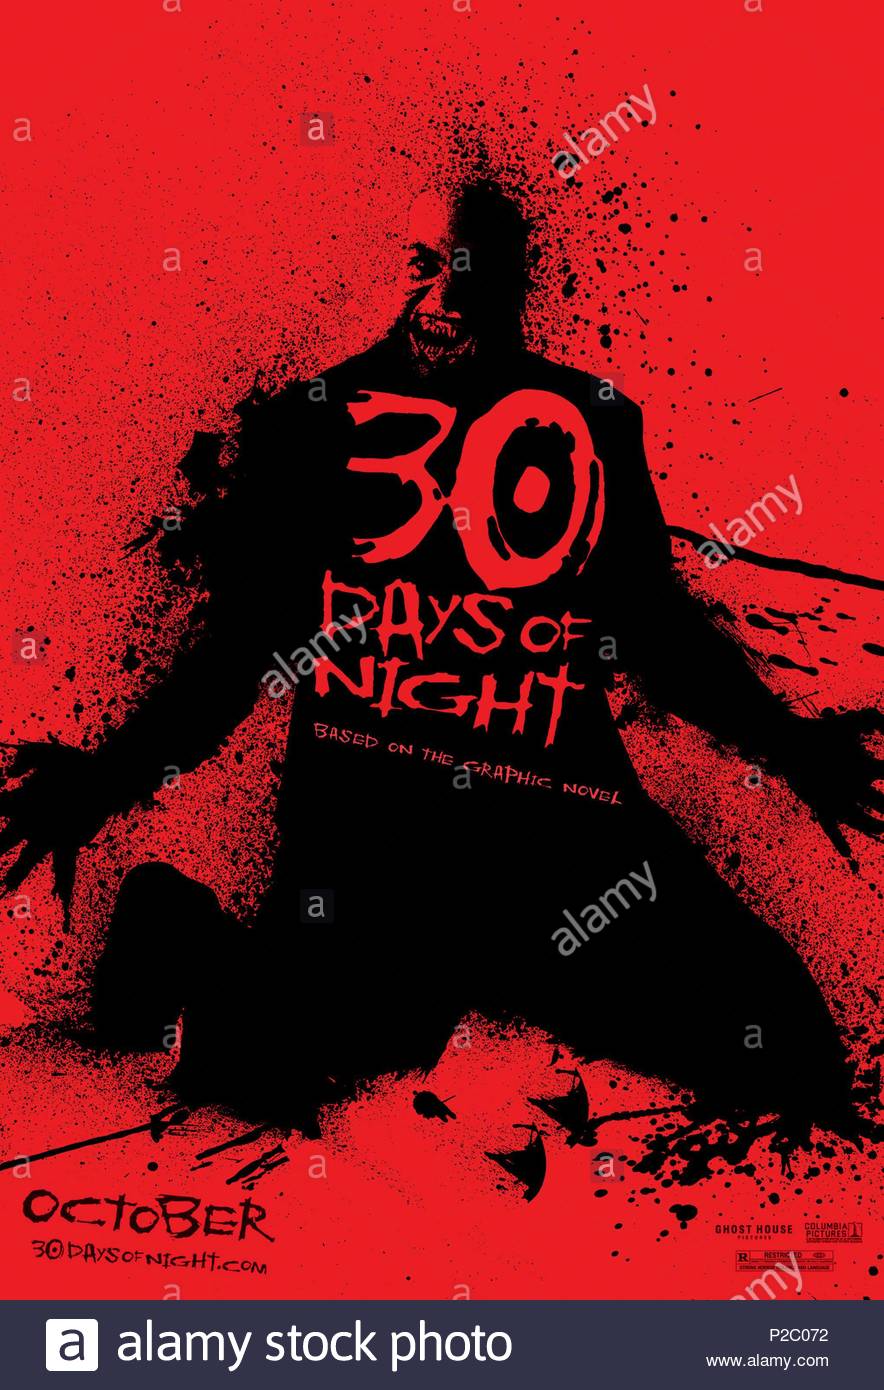 30 days of night full movie in hindi download hd